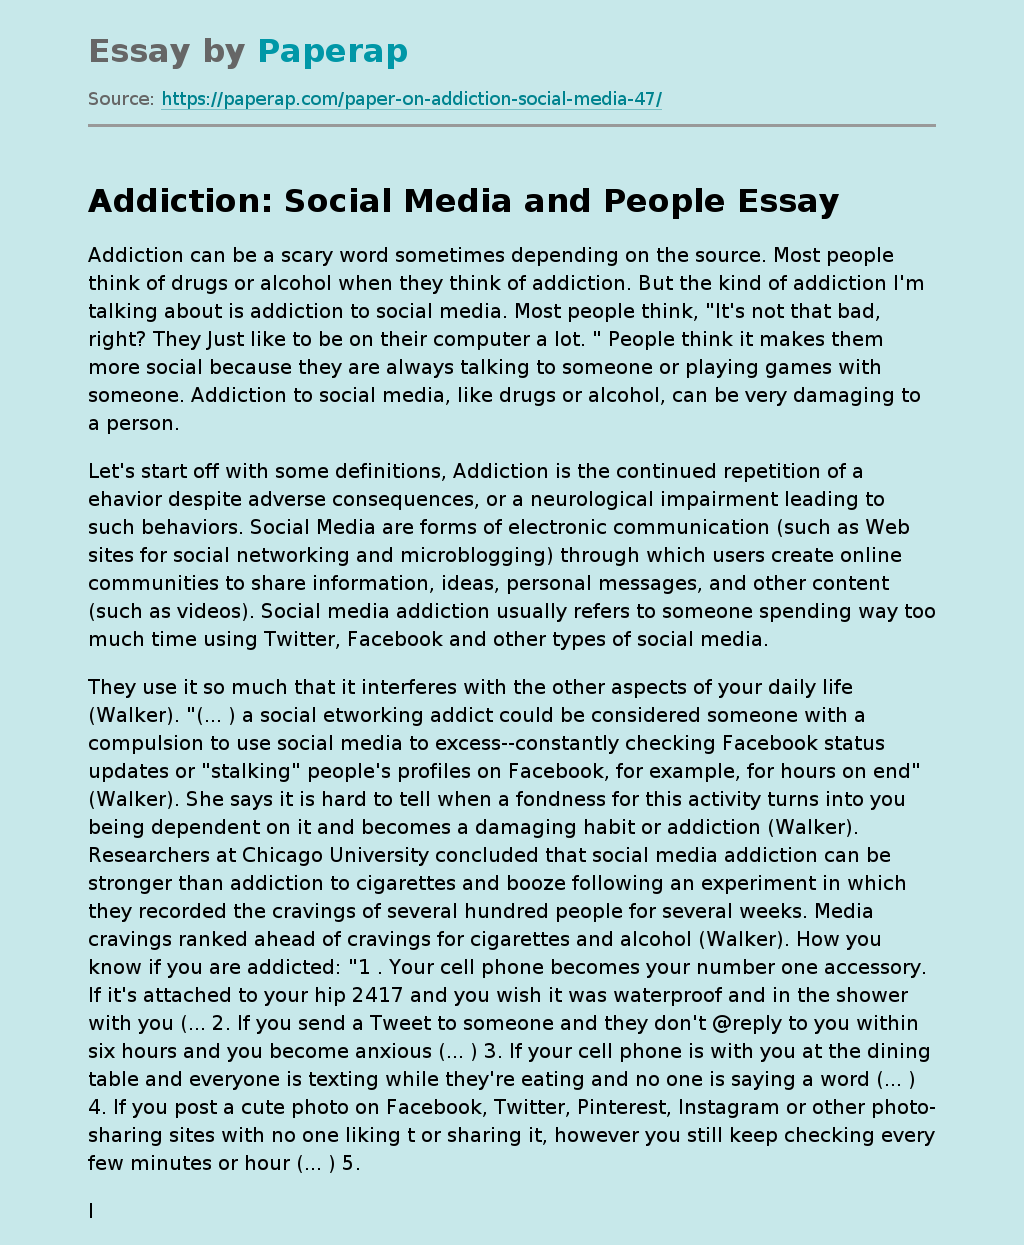 Addiction: Social Media and People